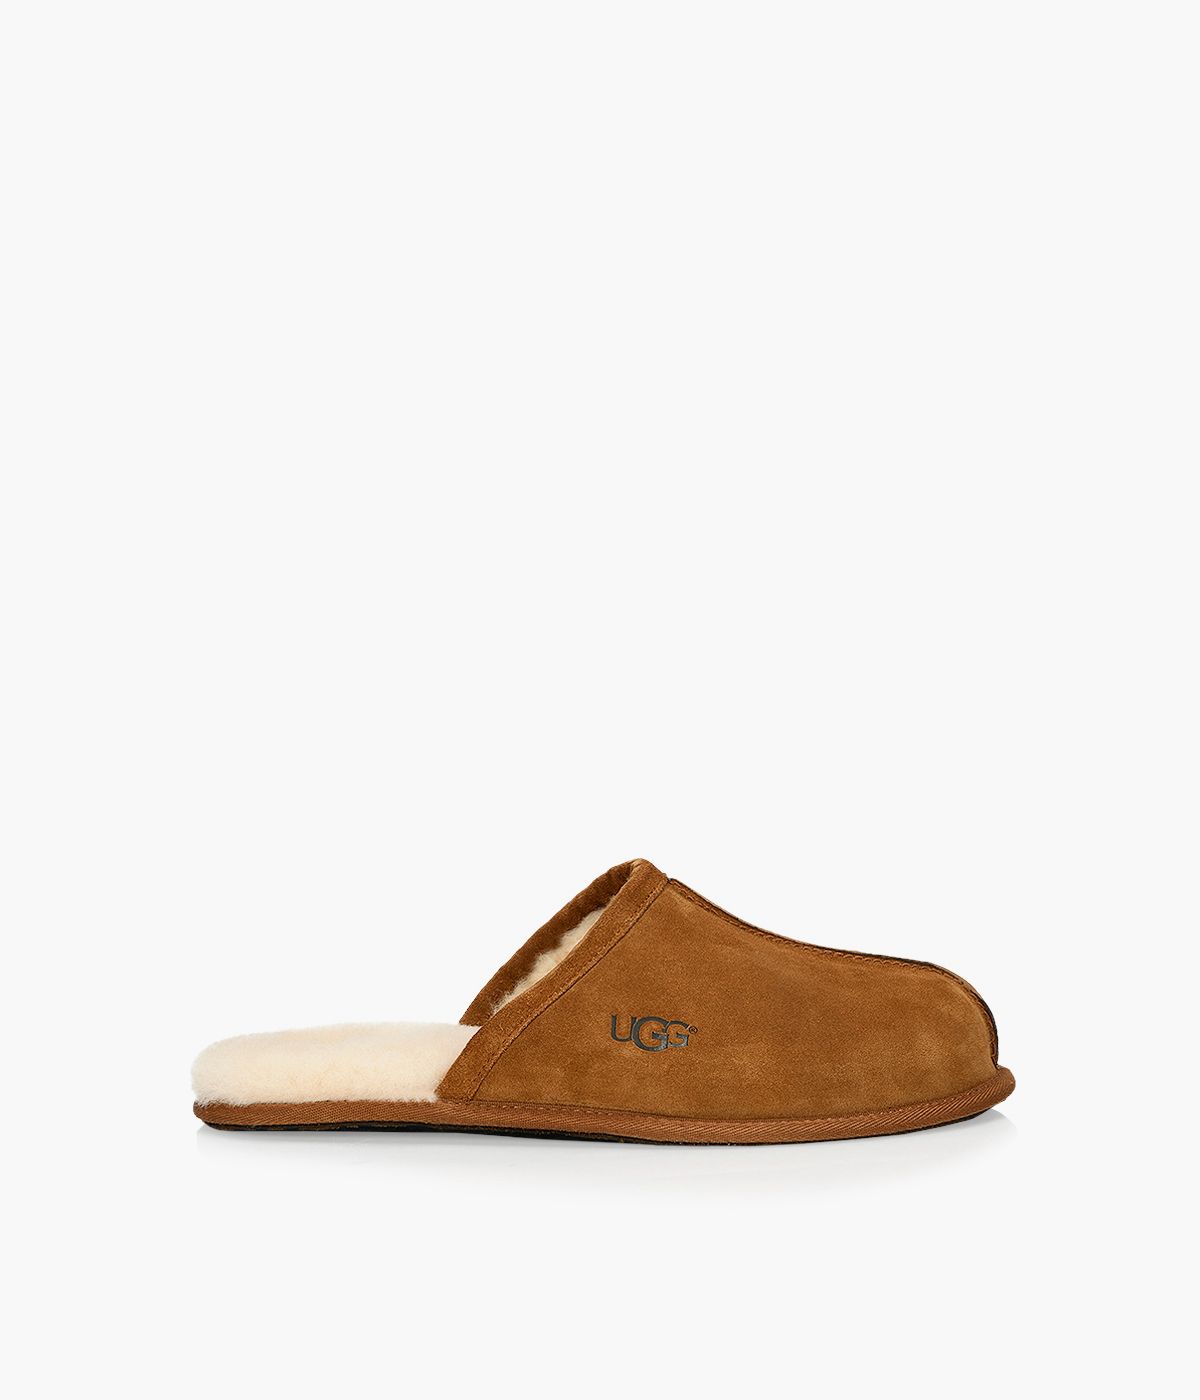 UGG SCUFF - Suede | Browns Shoes